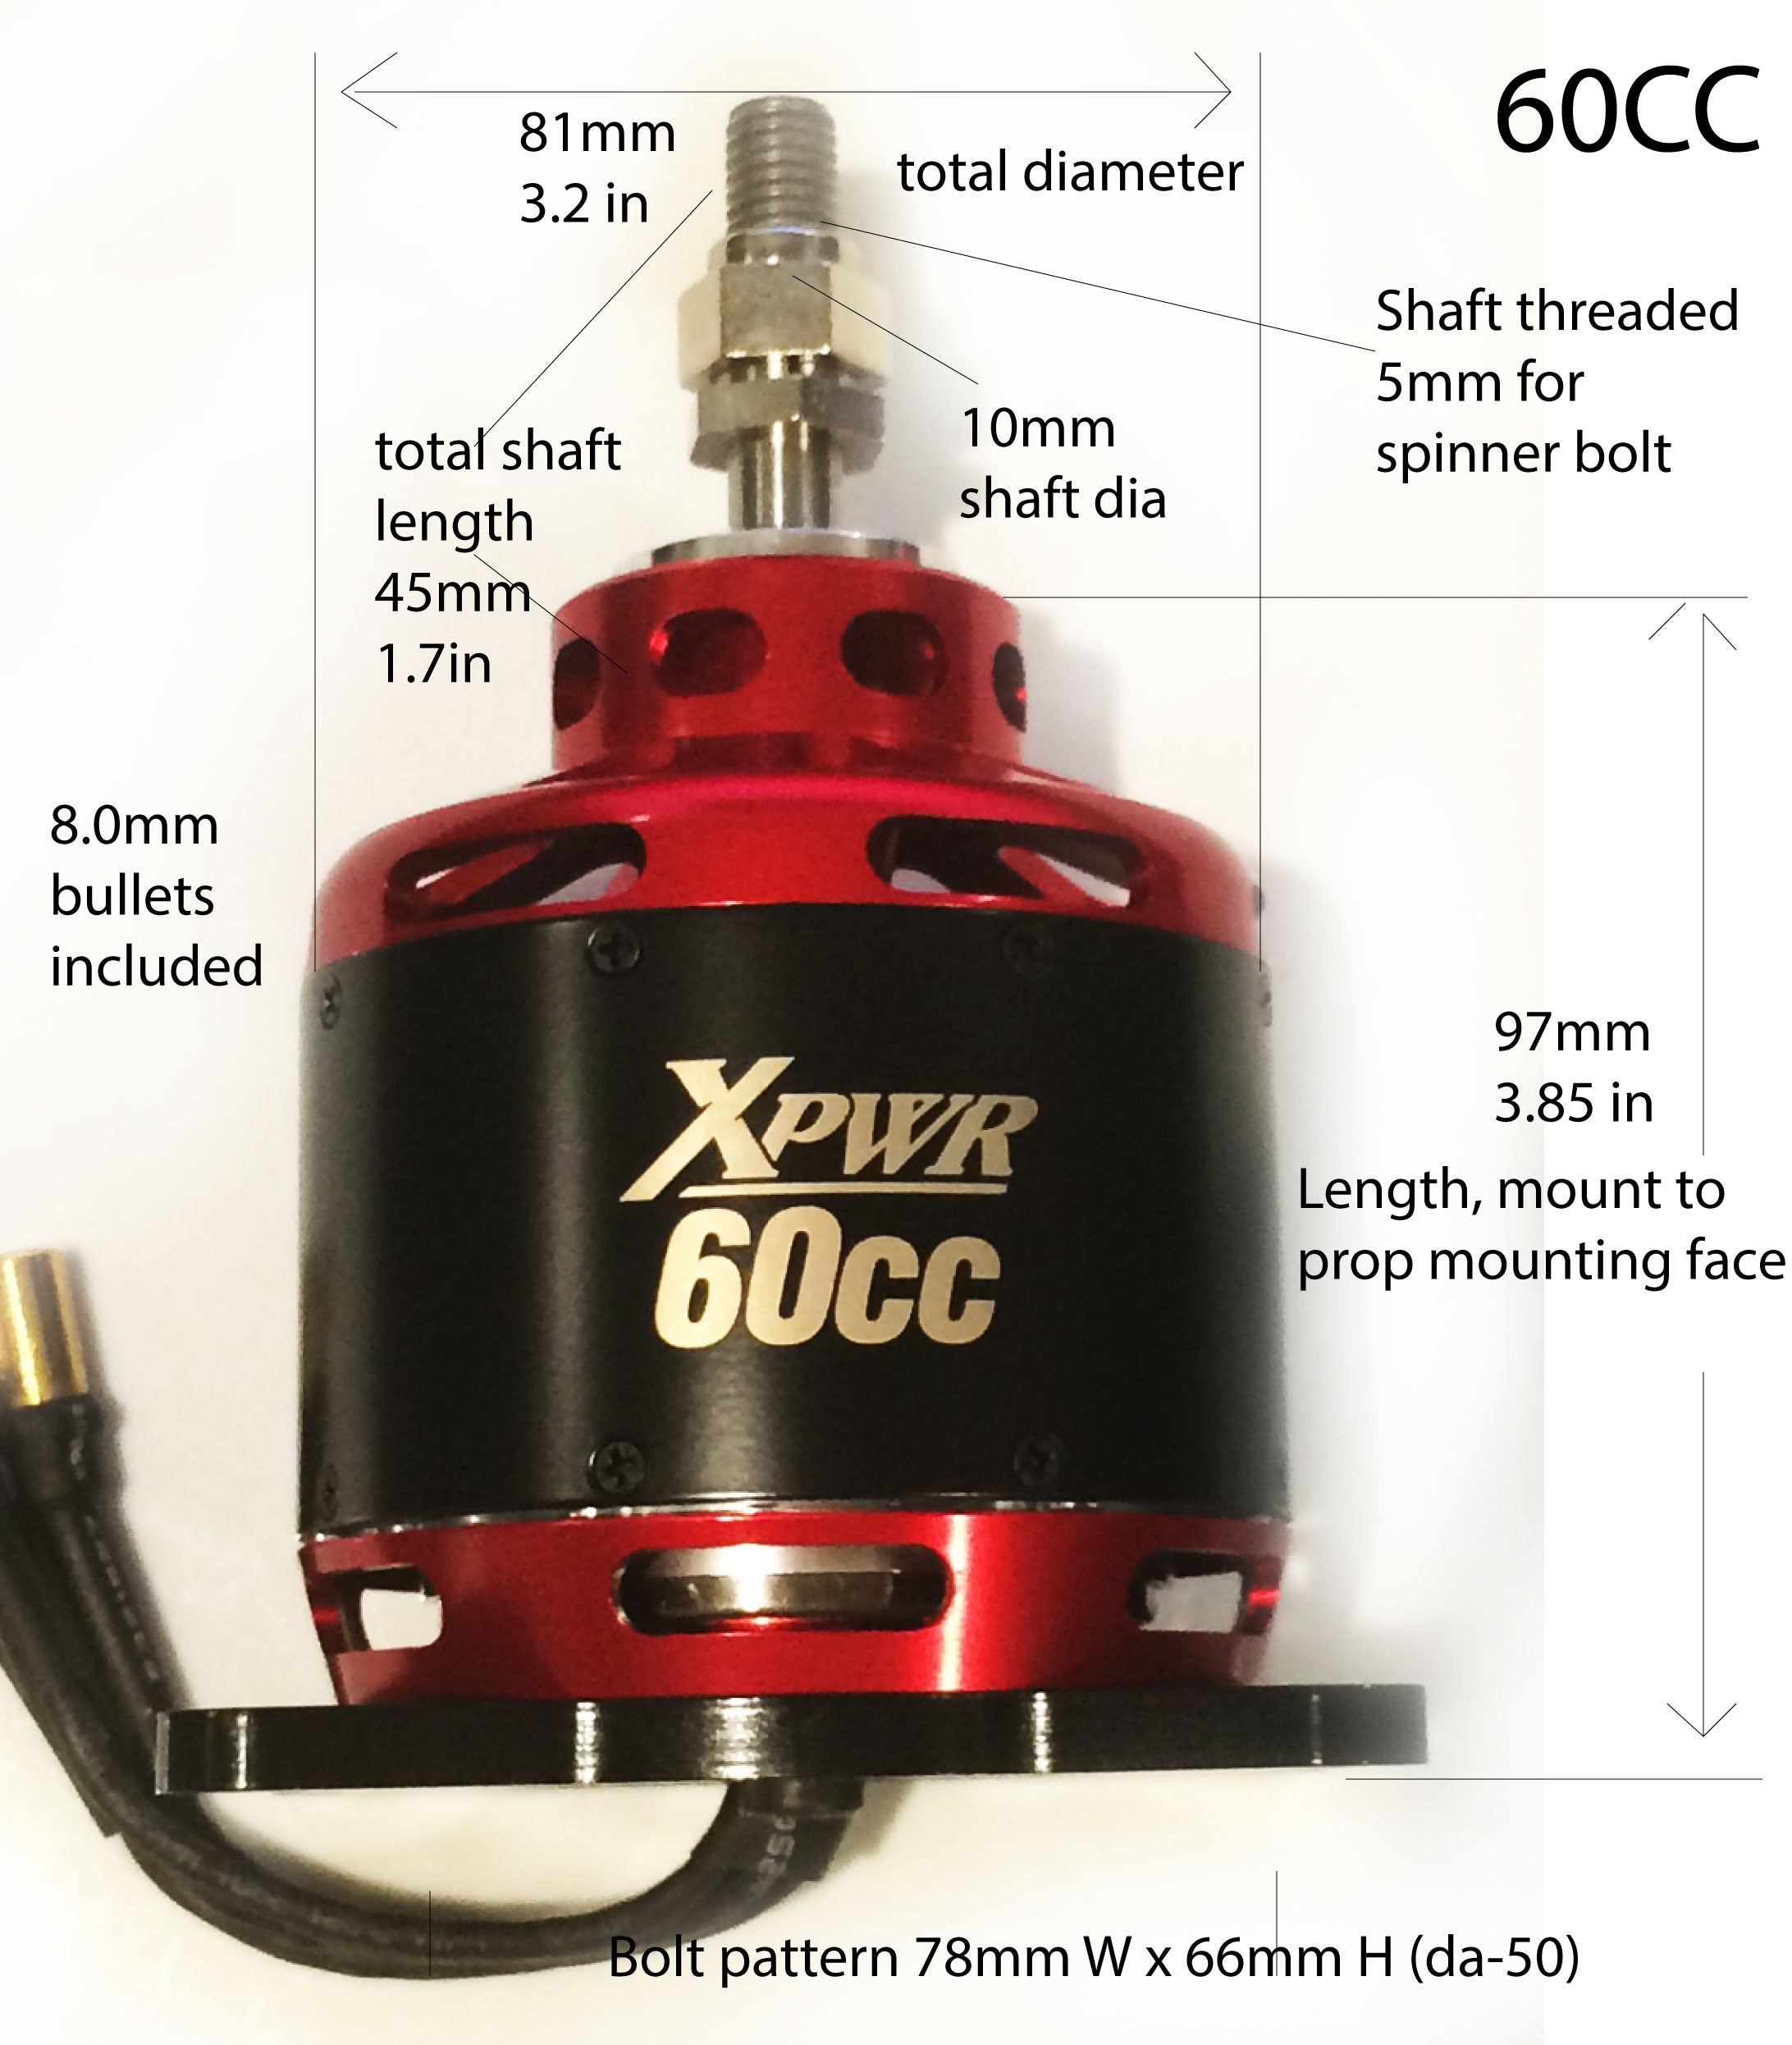 Xpwr 60CC Motor from Extreme Flight XPWR-60CC